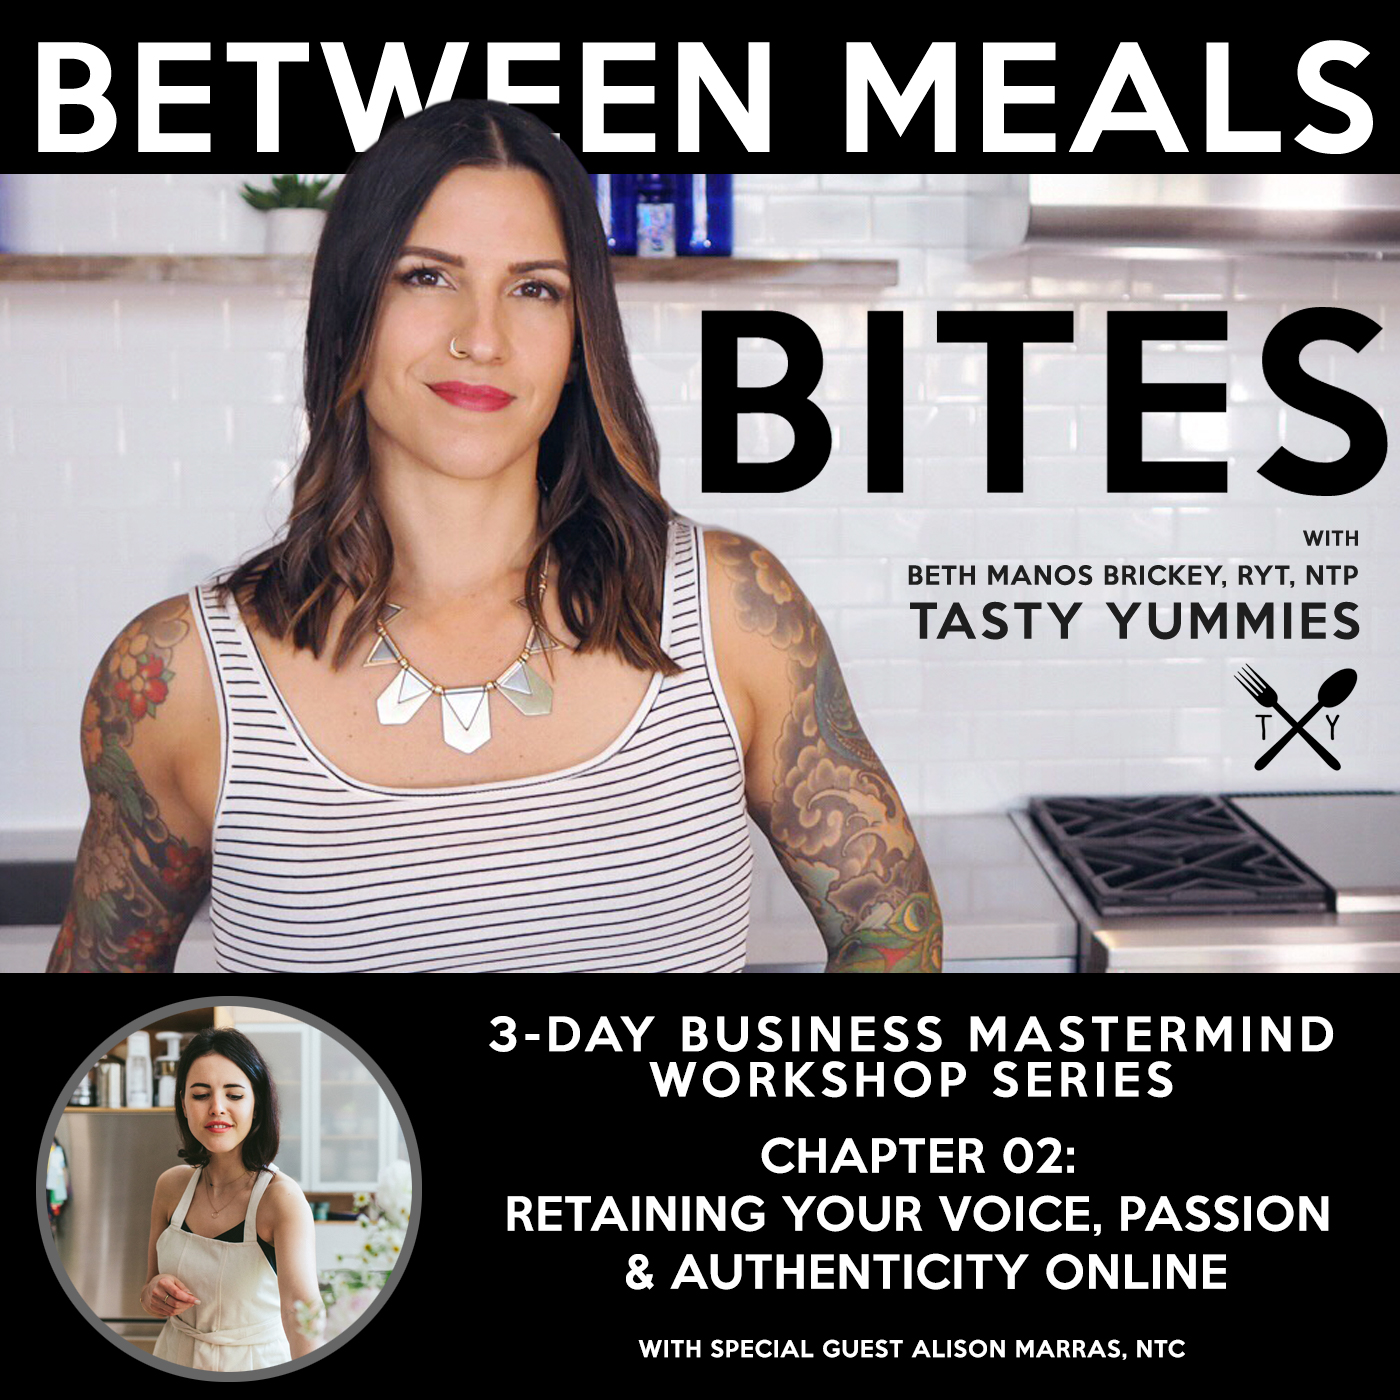 Between Meals Podcast // Bites 02: Retaining Your Voice, Passion and Authenticity Online